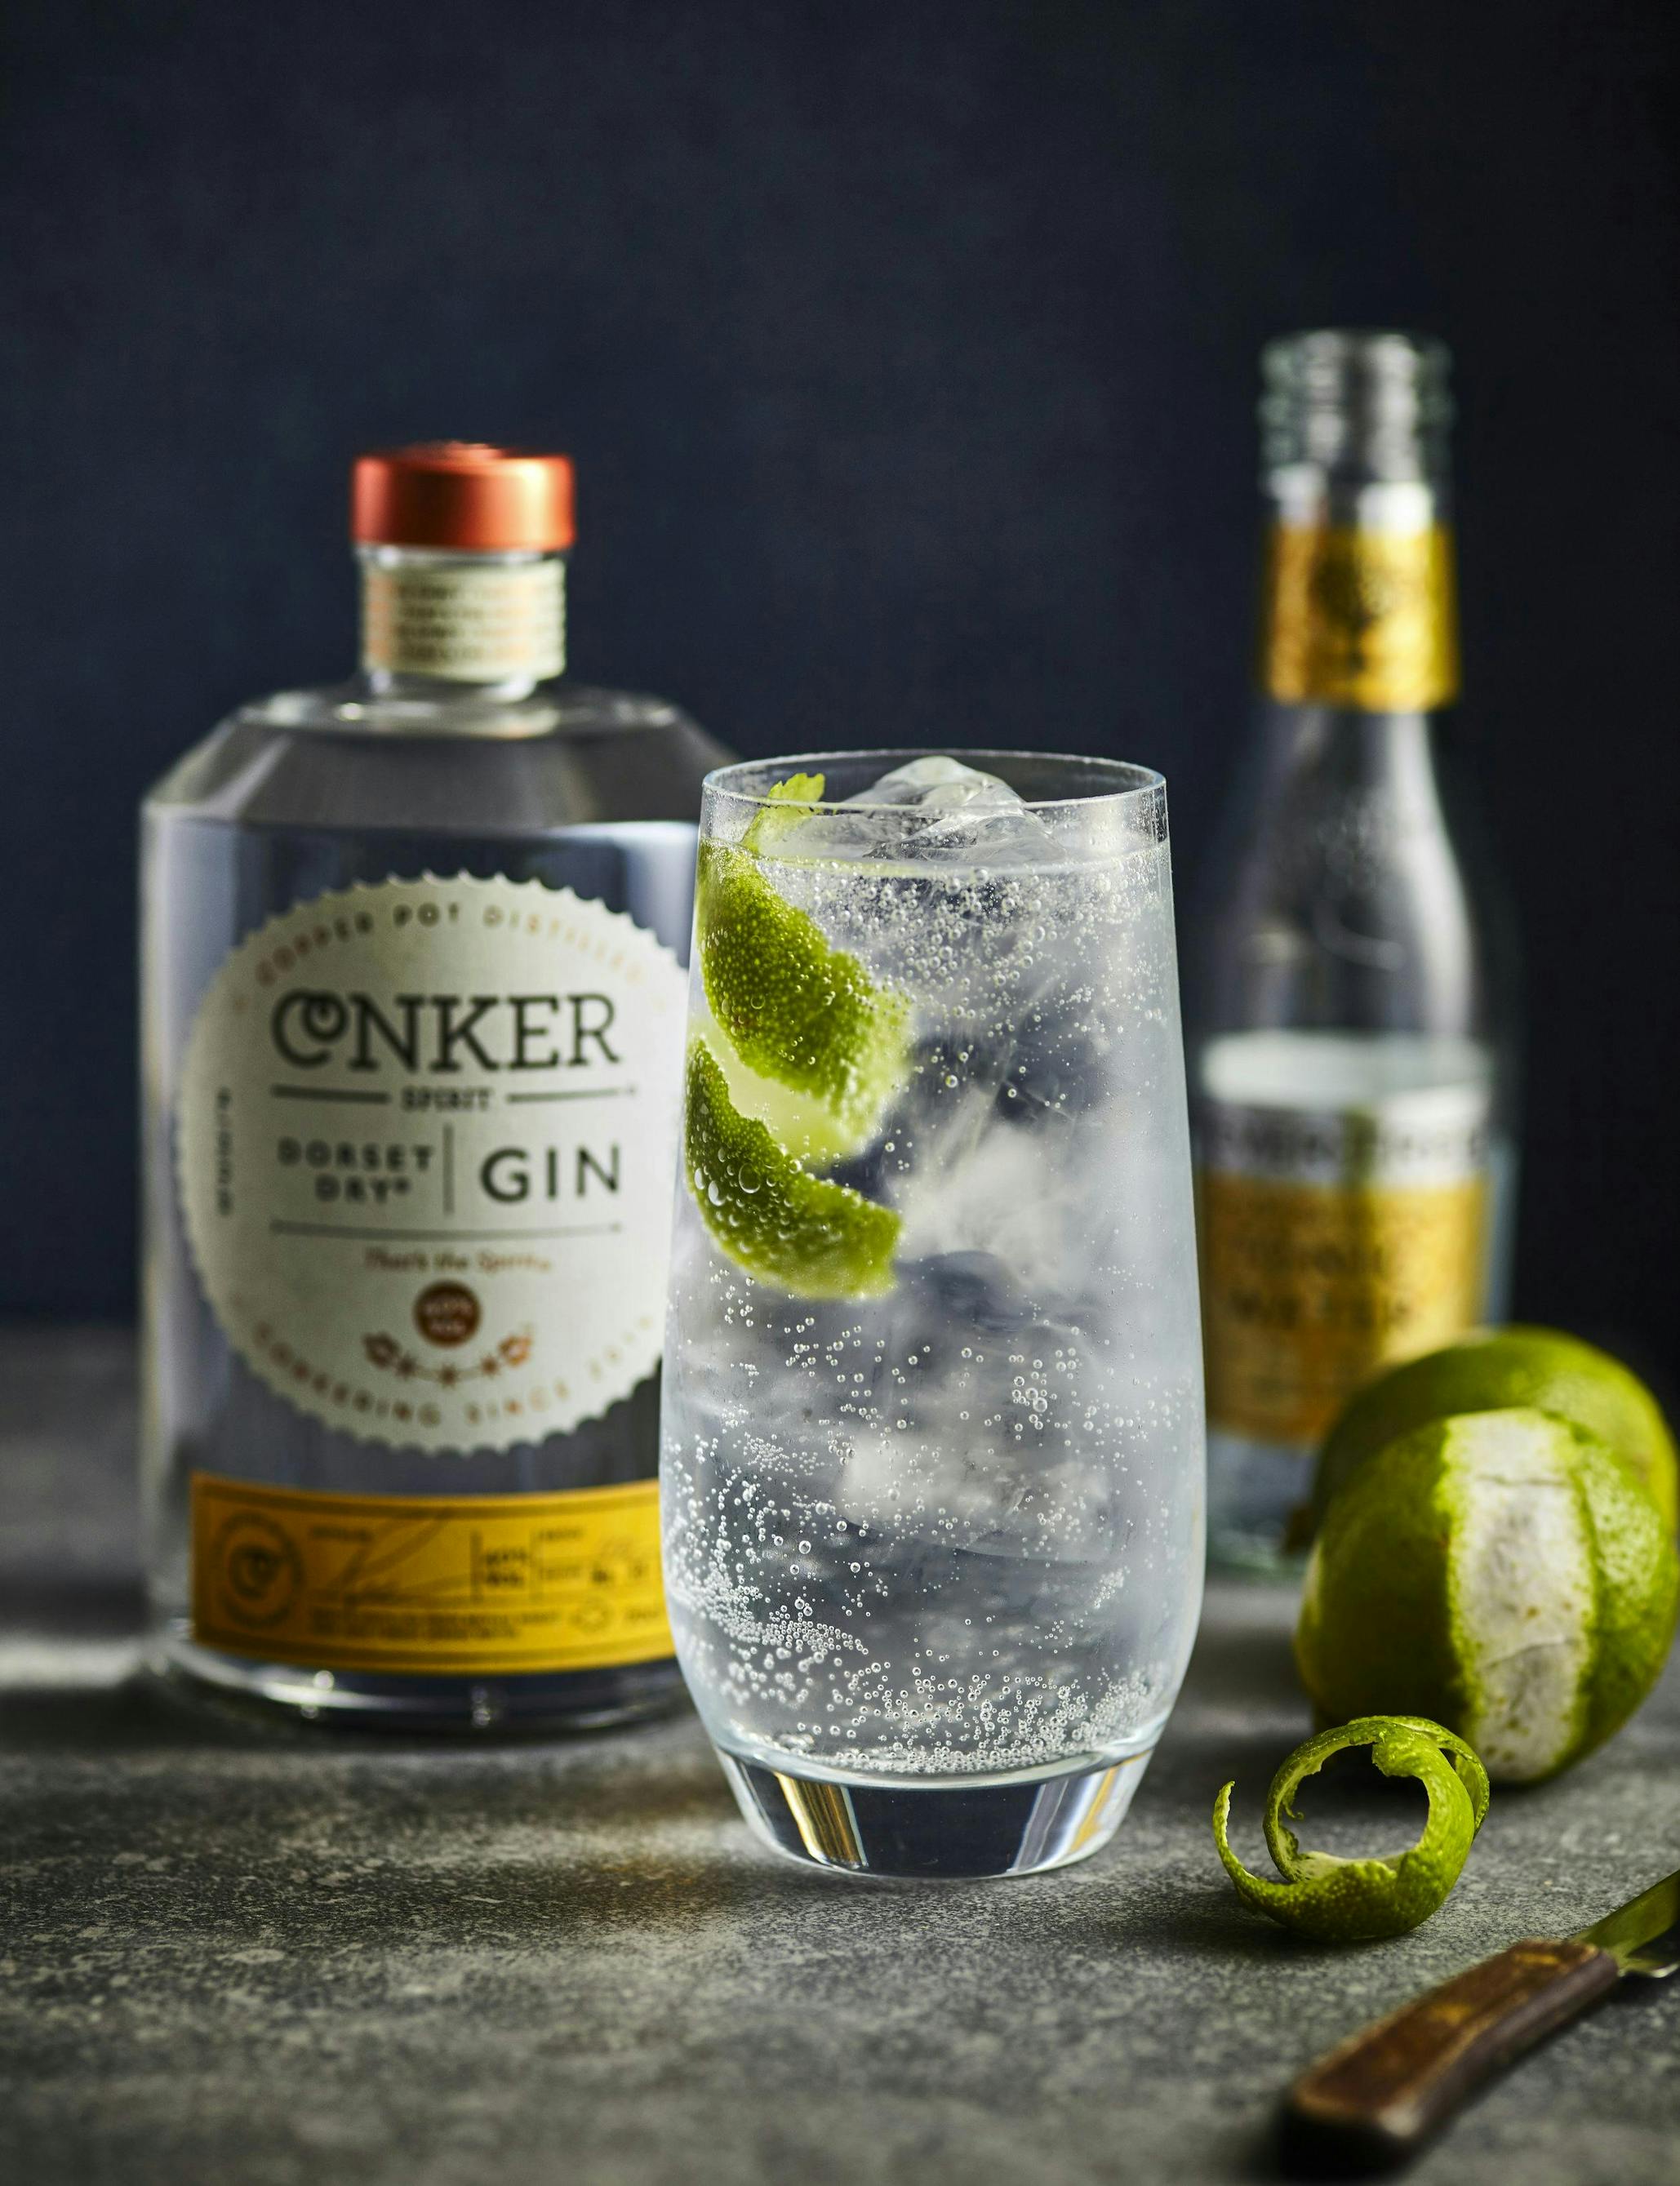 conker gin and tonic with lime peel twist garnish